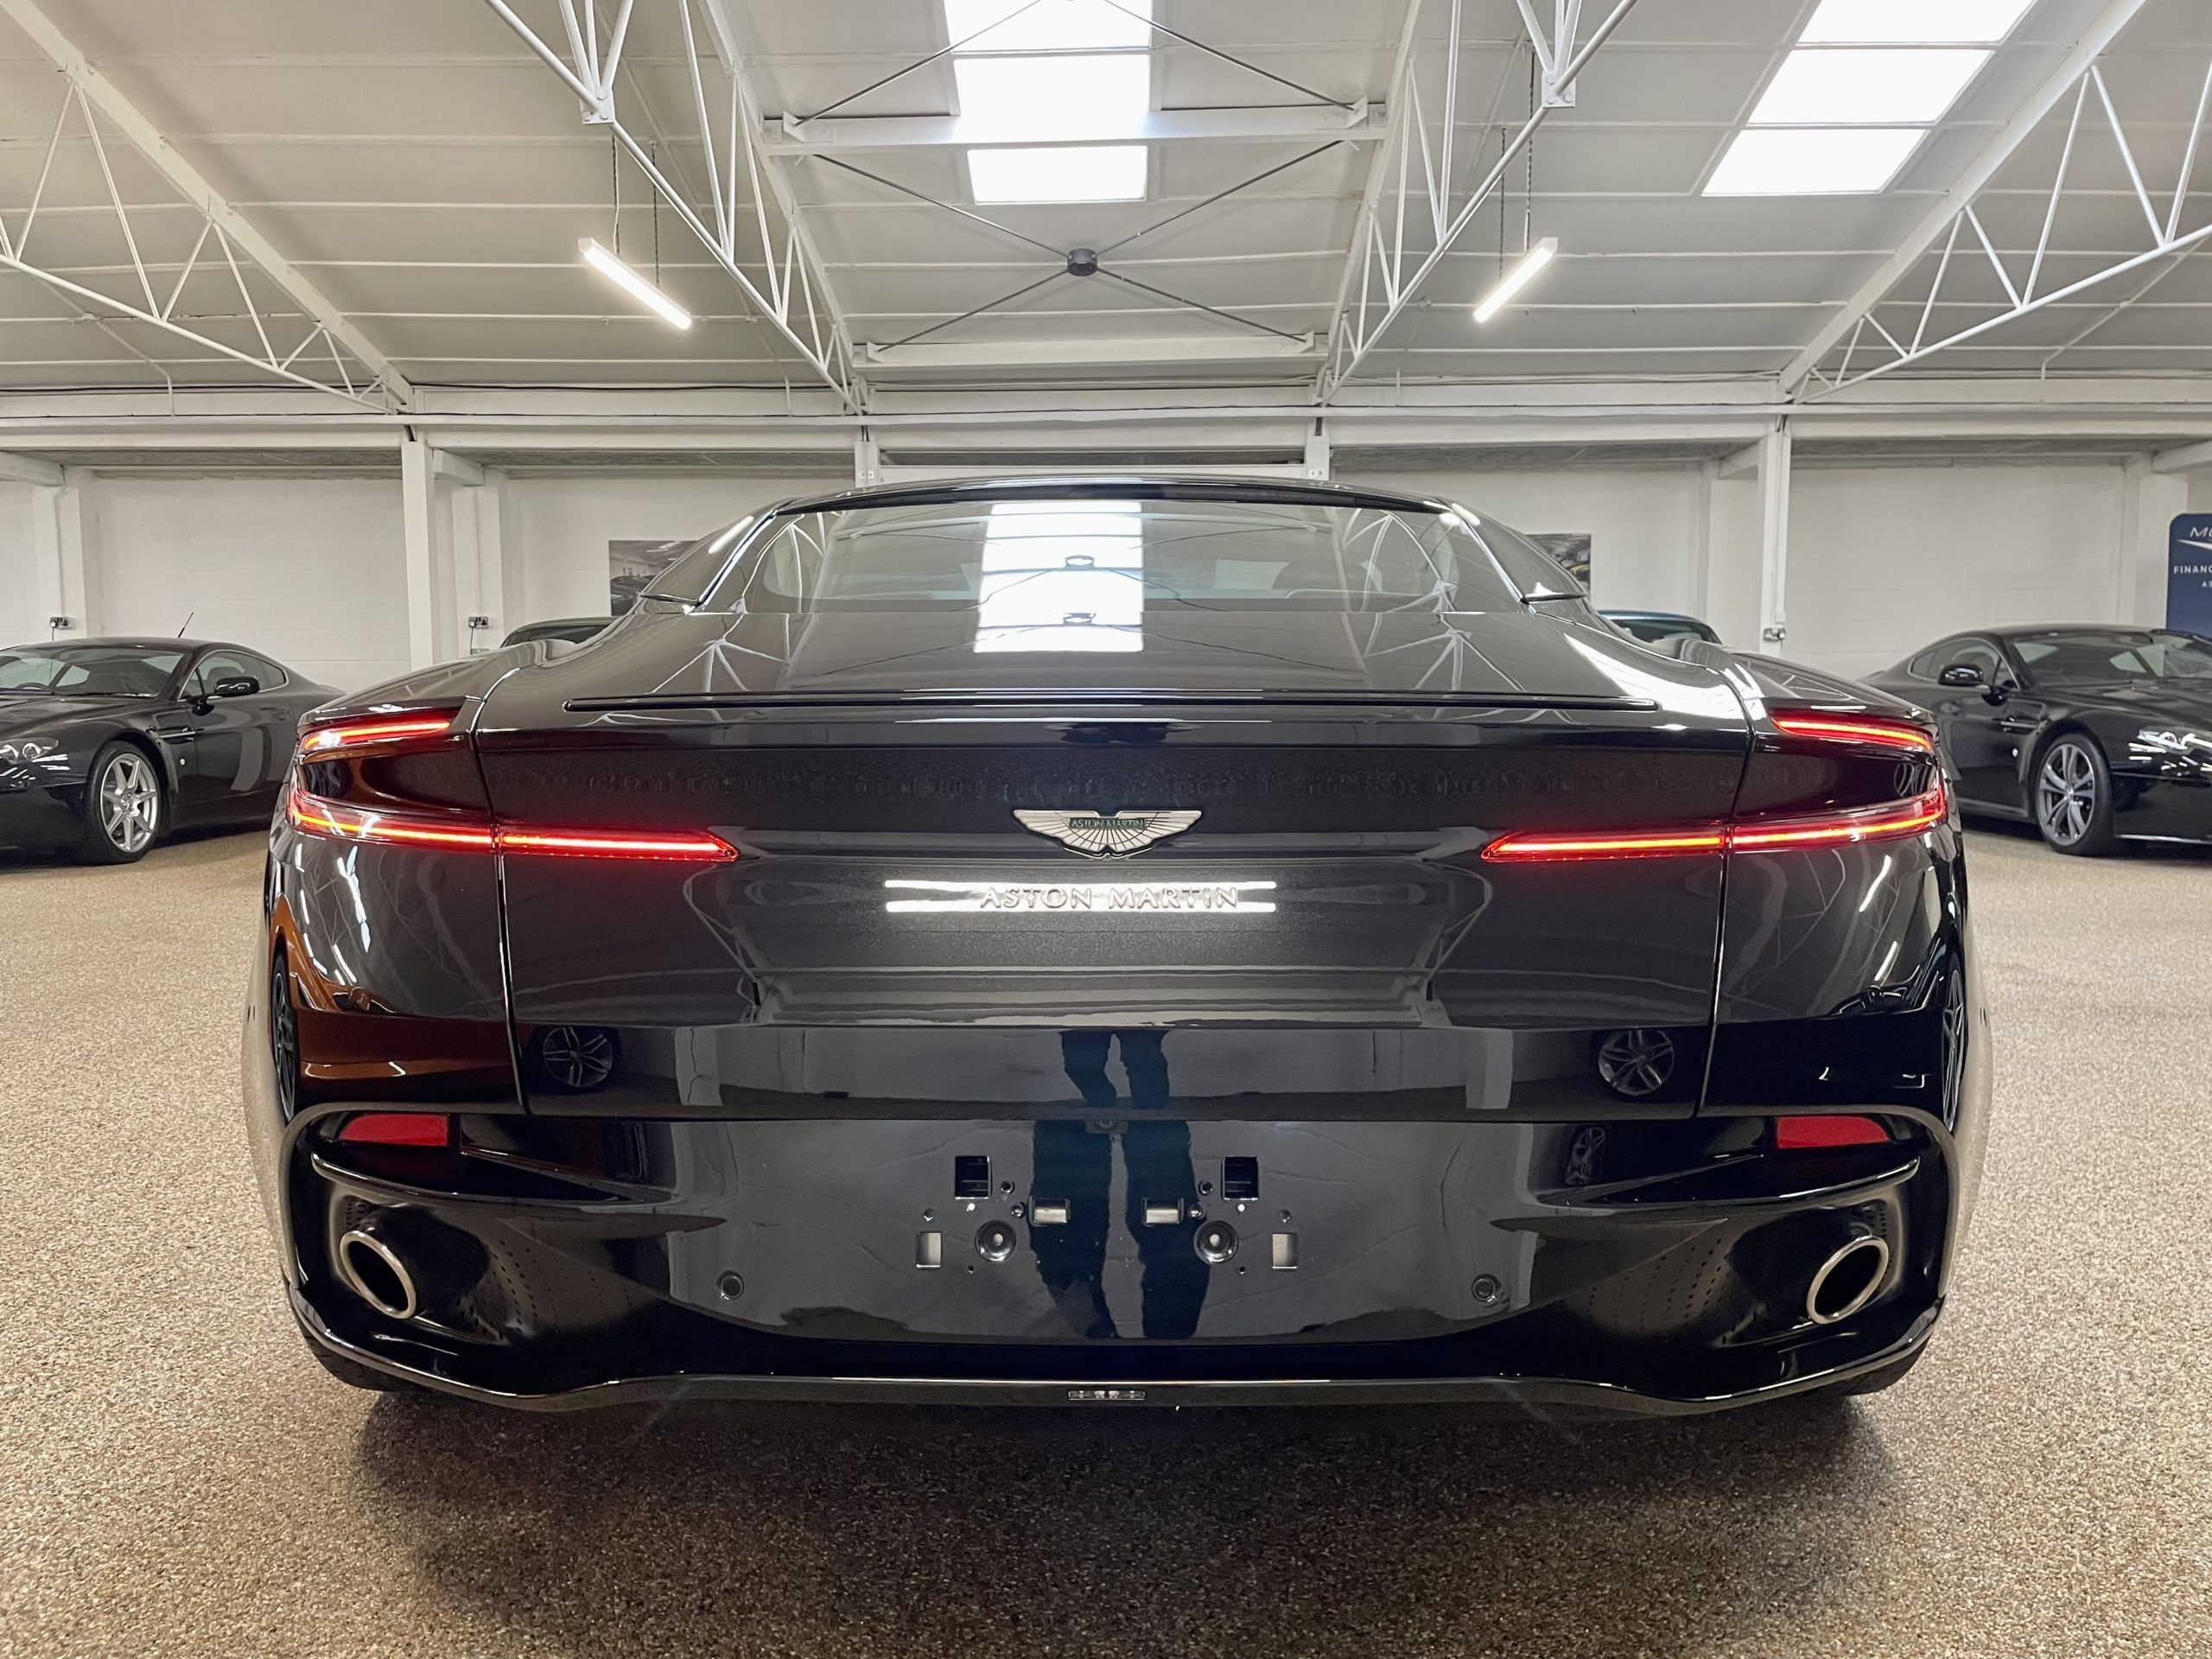 Used DB11 5.2 2019 for sale